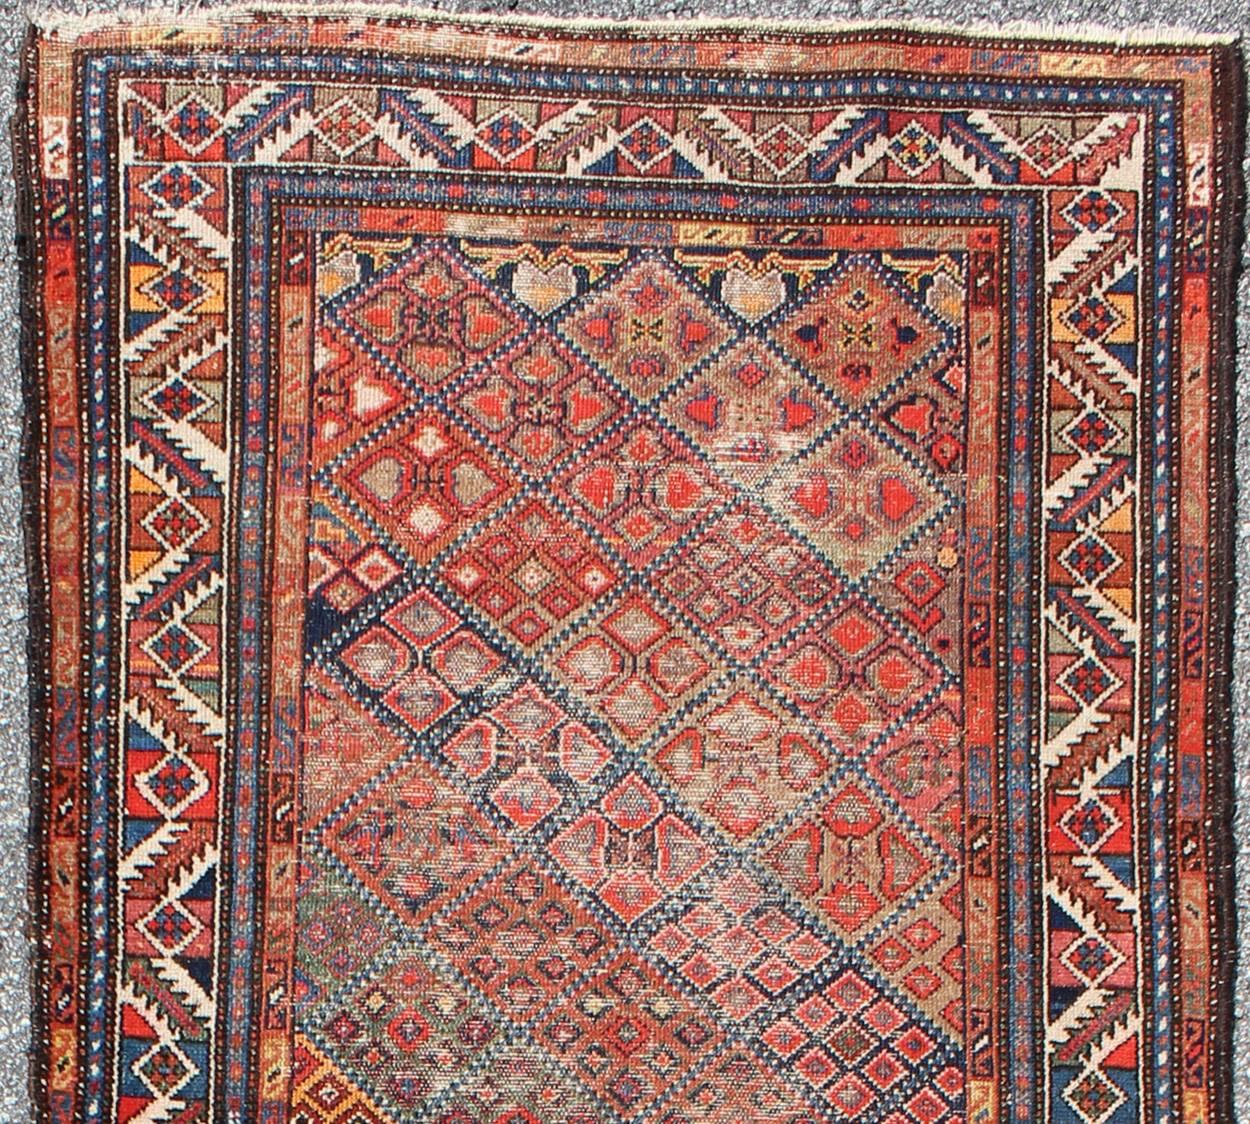 Antique Persian Malayer runner with diagonal diamond sub-geometric design, rug emac-003, country of origin / type: Iran / Malayer, circa 1900

This magnificent early 20th century antique Persian Malayer runner bears a beautiful, all-over